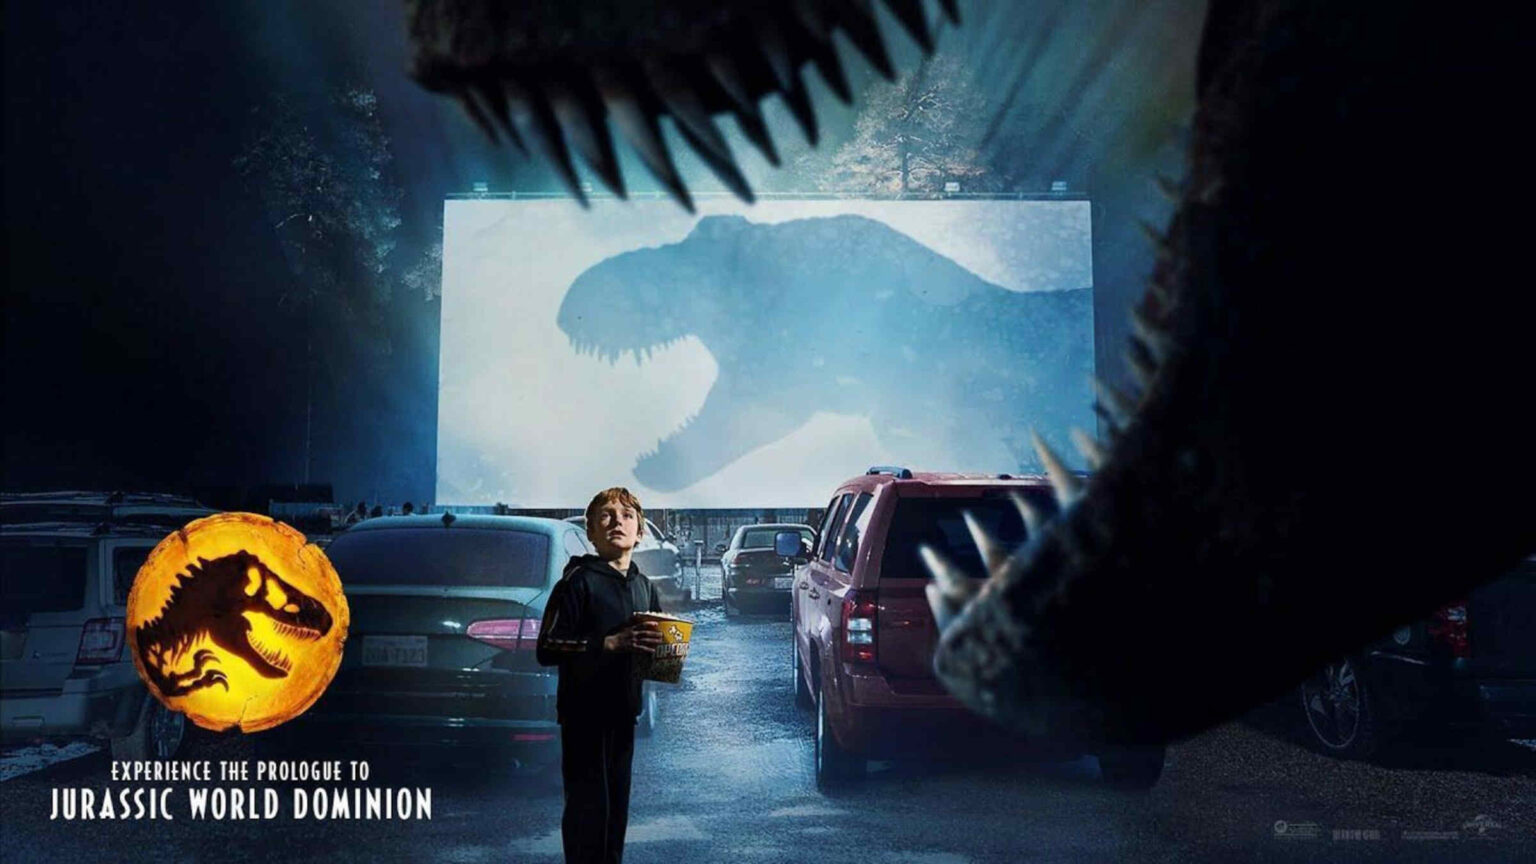 'Jurassic World Dominion' is finally here. Find out where is the best place to stream anticipated Chris Pratt Adventure movie Jurassic World 3 online for free.